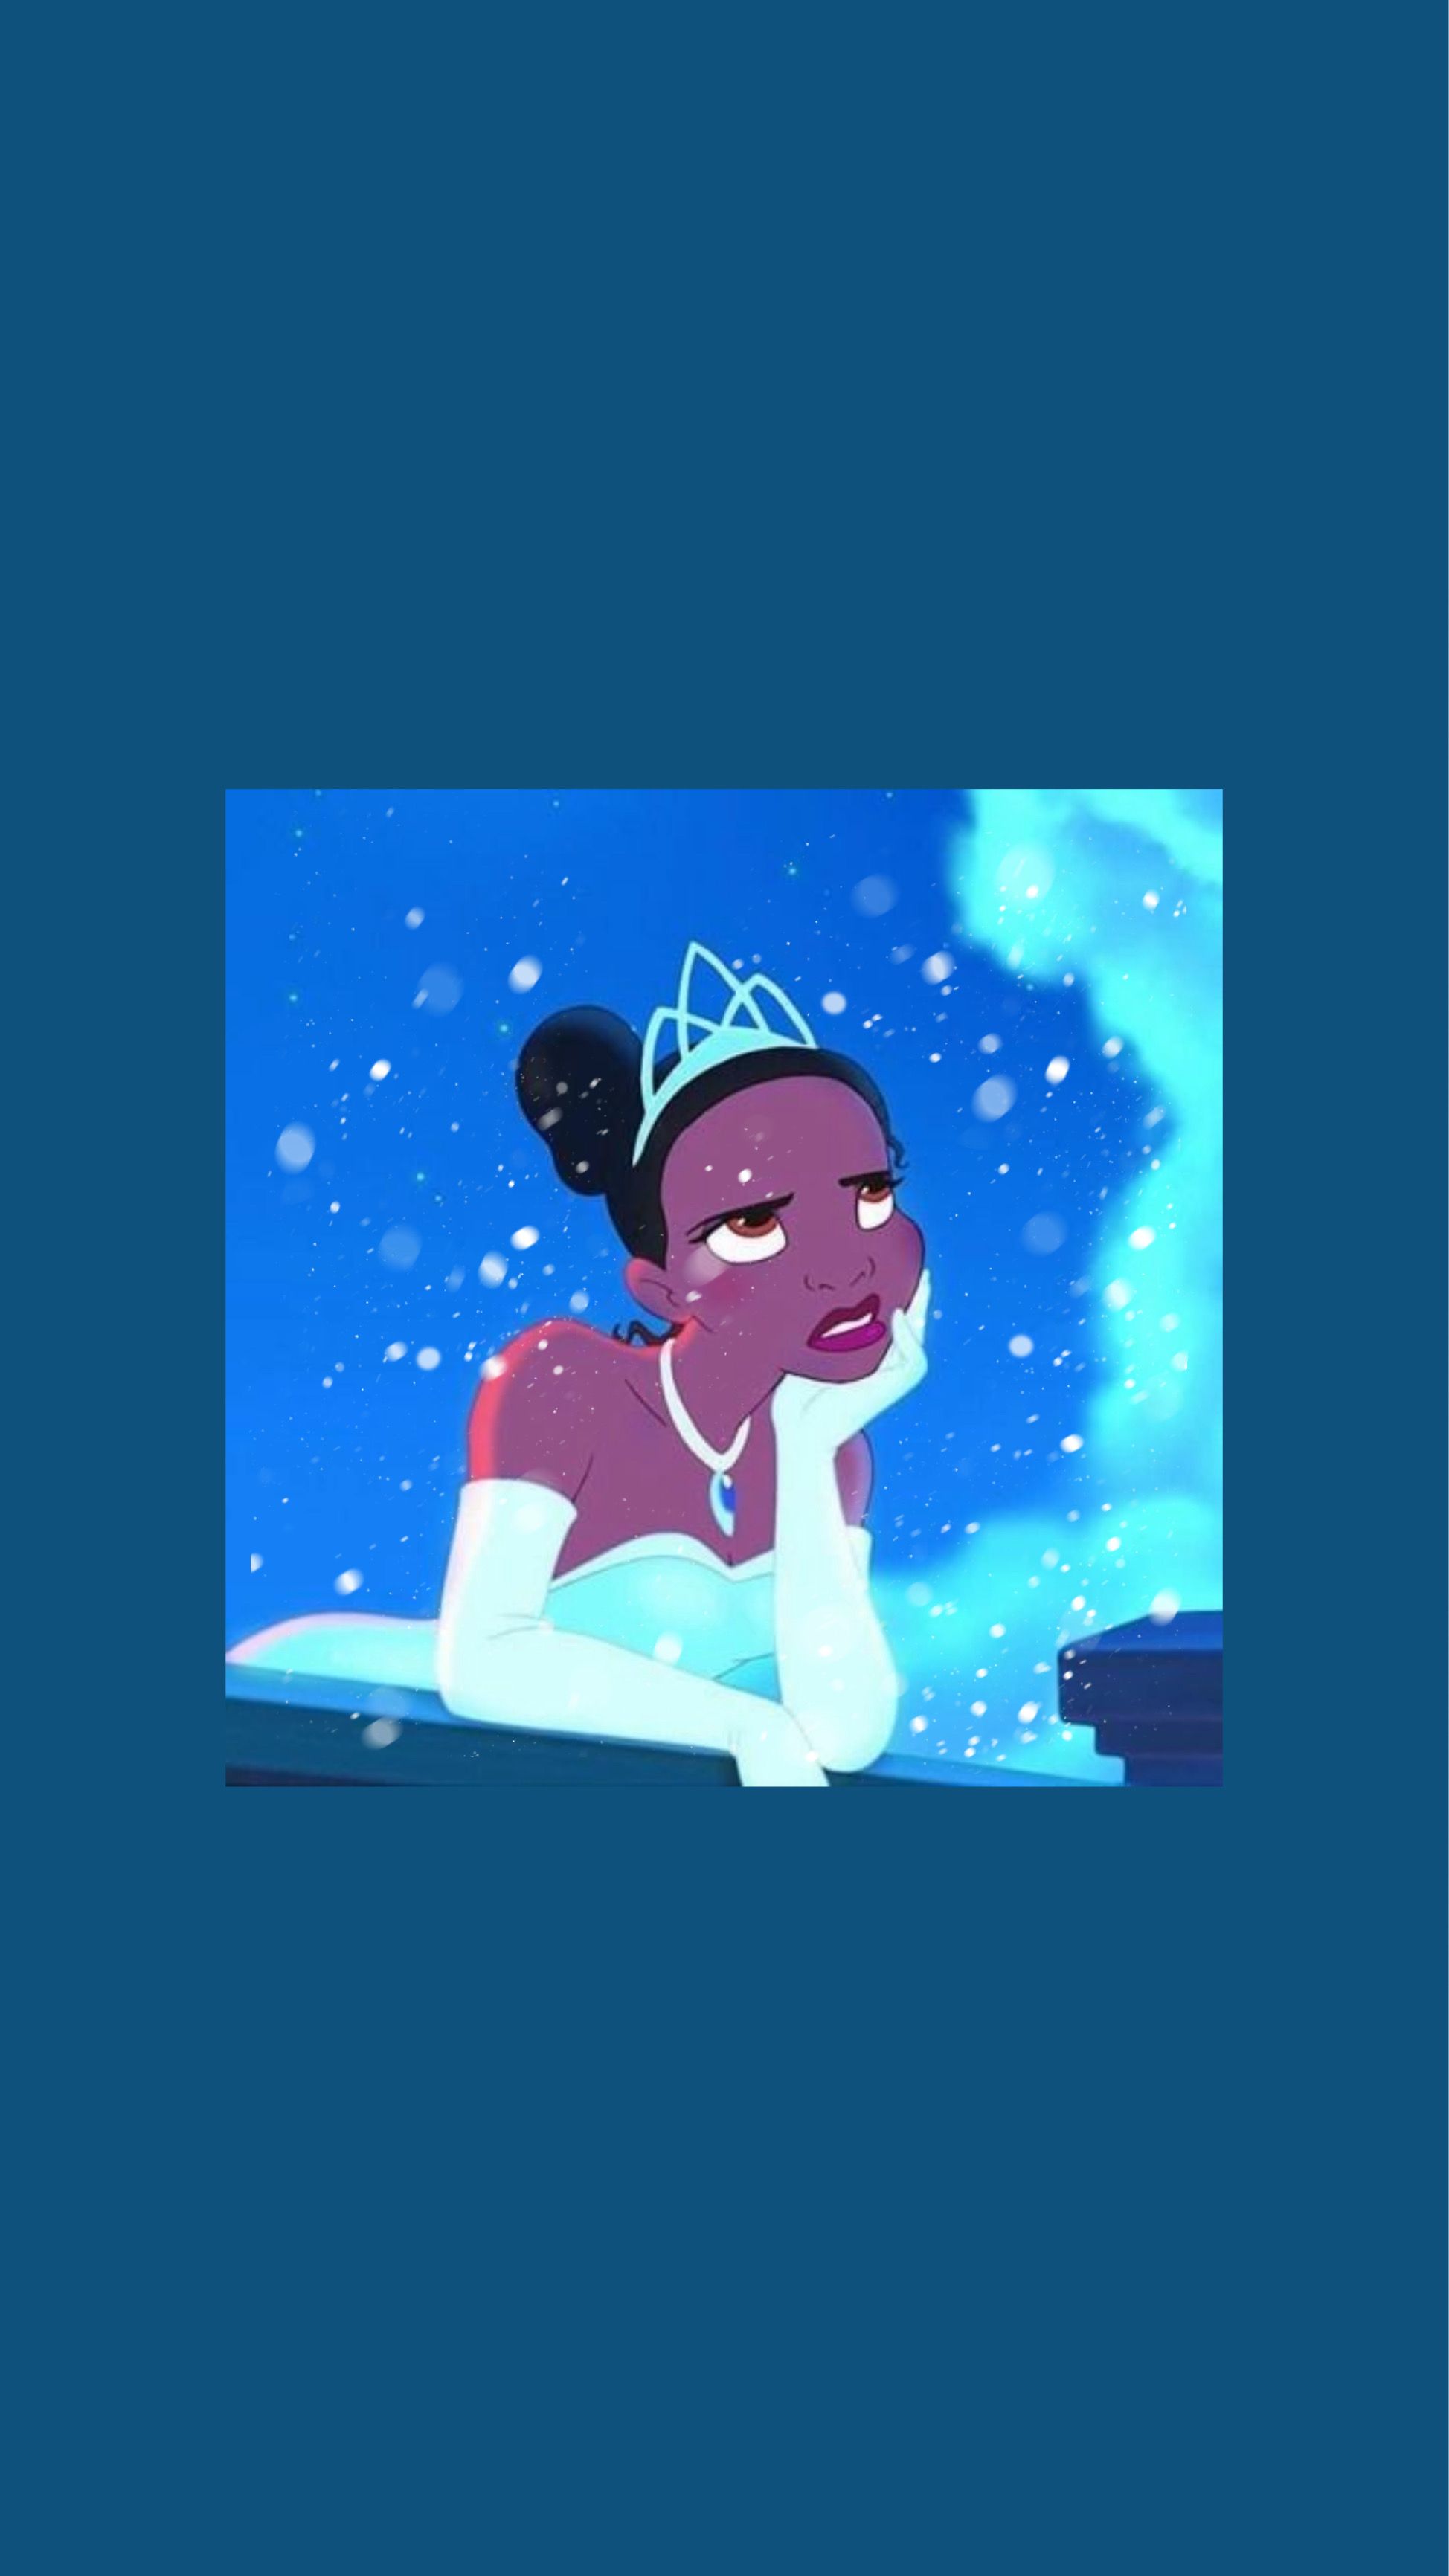 Tiana from The Princess and the Frog. - Princess